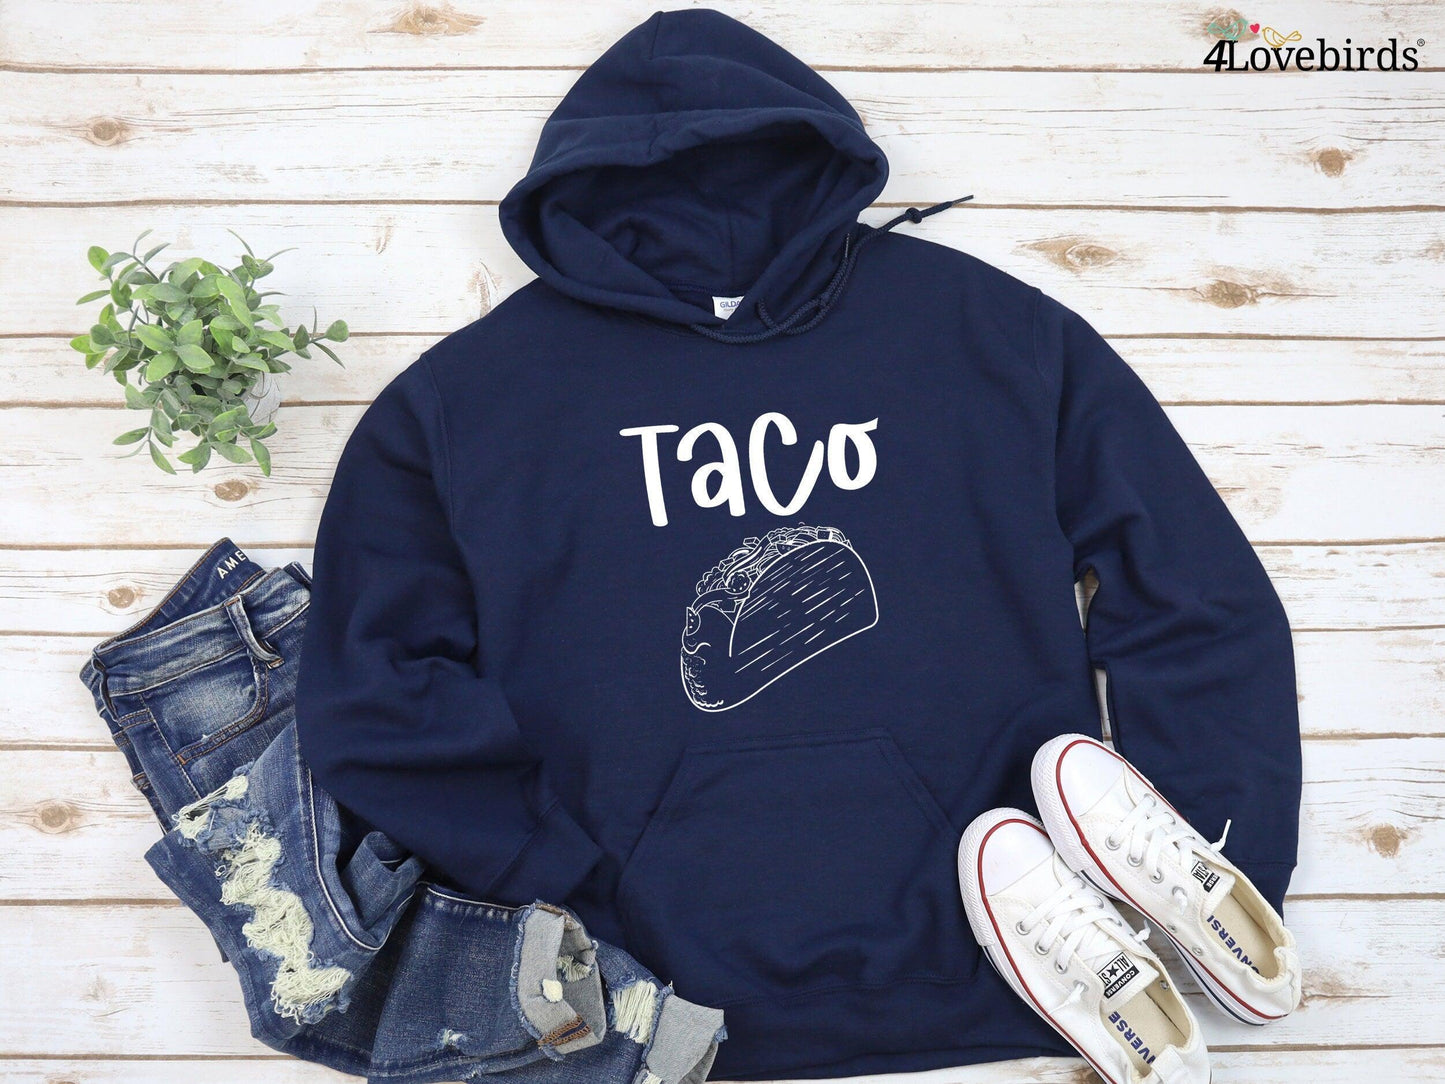 Taco - Taquito - Latino Parents Matching Hoodies - Matching Food Lover Sweatshirts - Baby Shower Gifts - Baby Gifts - Daddy, Mommy & Me - 4Lovebirds